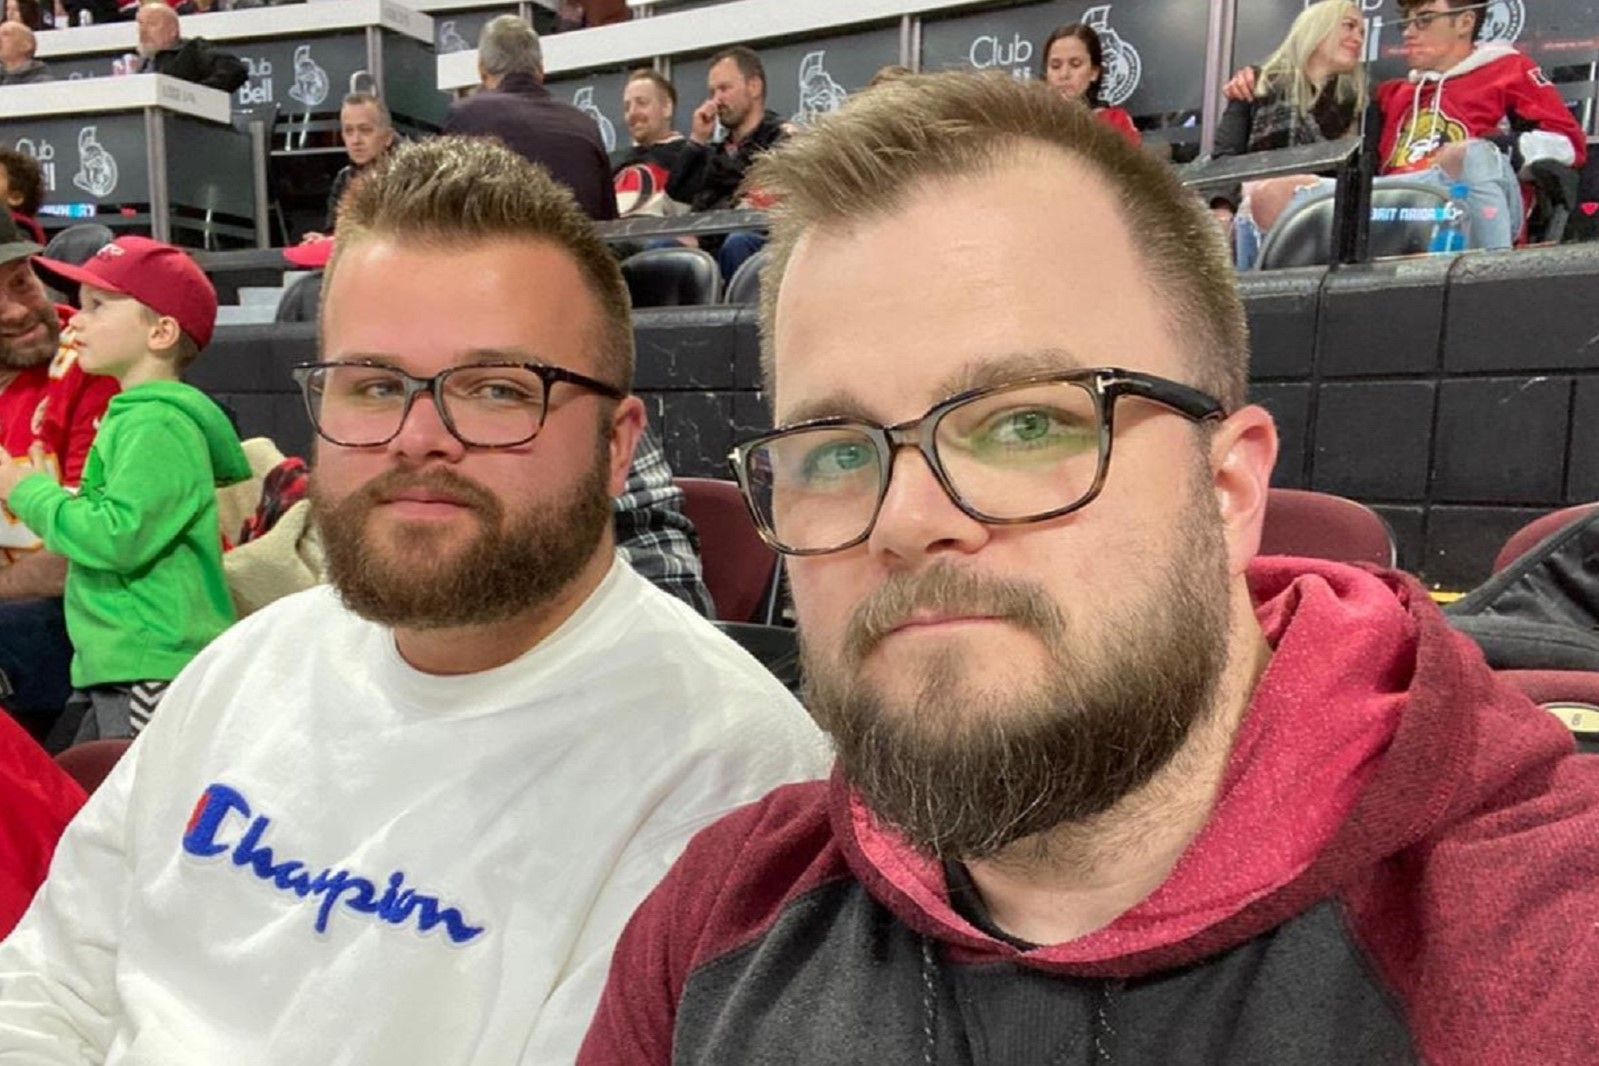 doppelgangers at a game